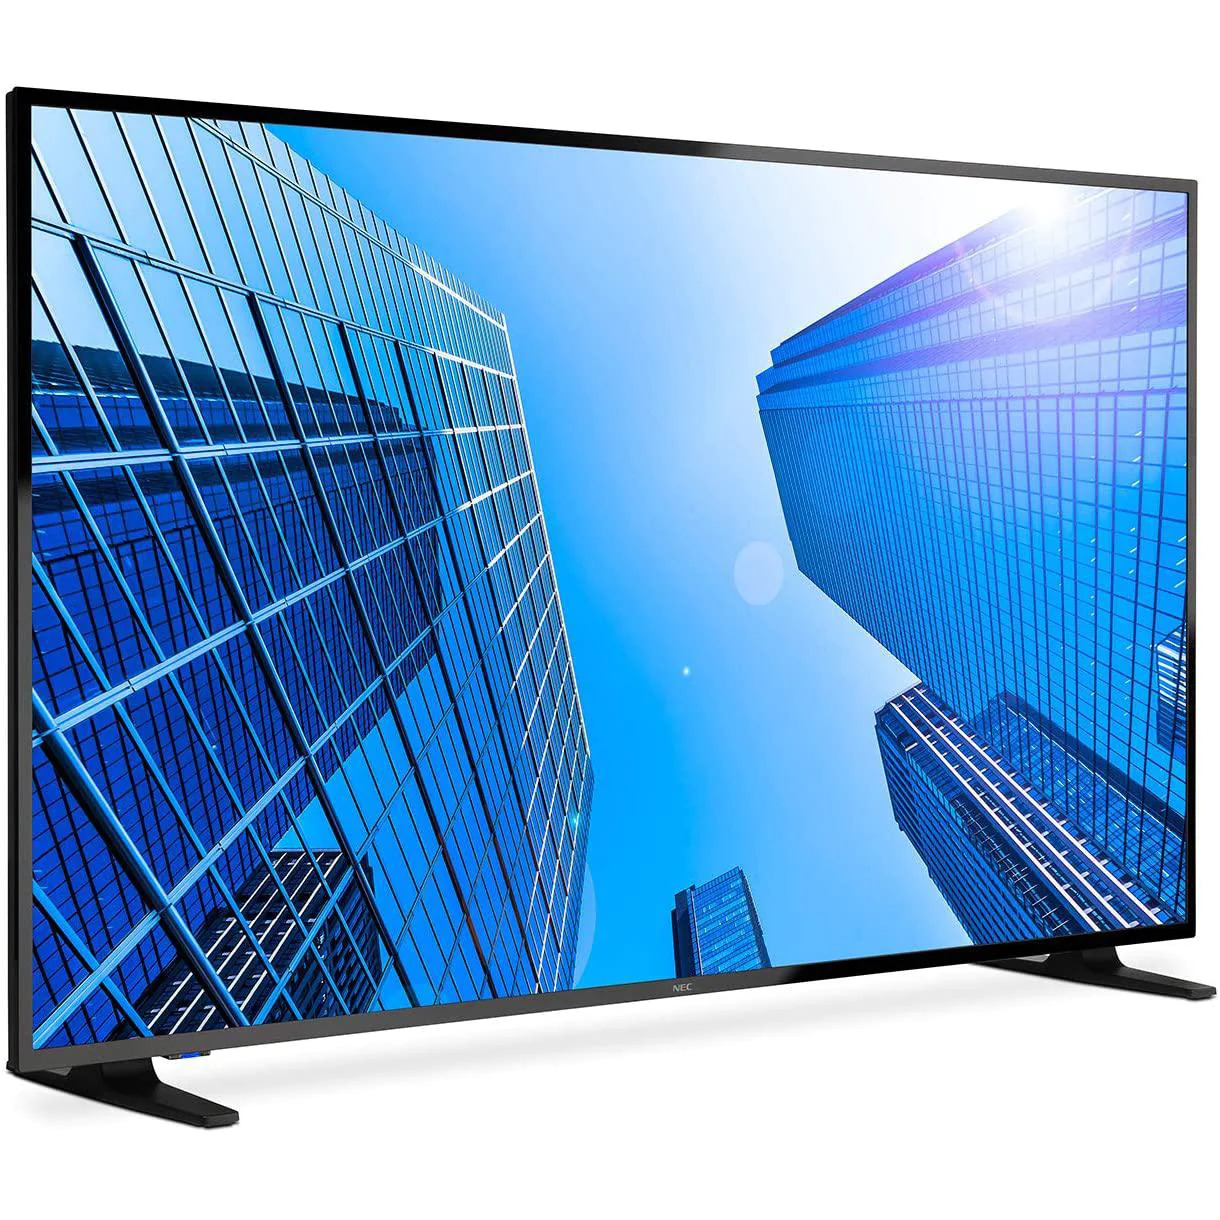 NEC E657Q 65" 4K UHD 60Hz 8ms Commercial Display - New, Opened Box Full Size Image